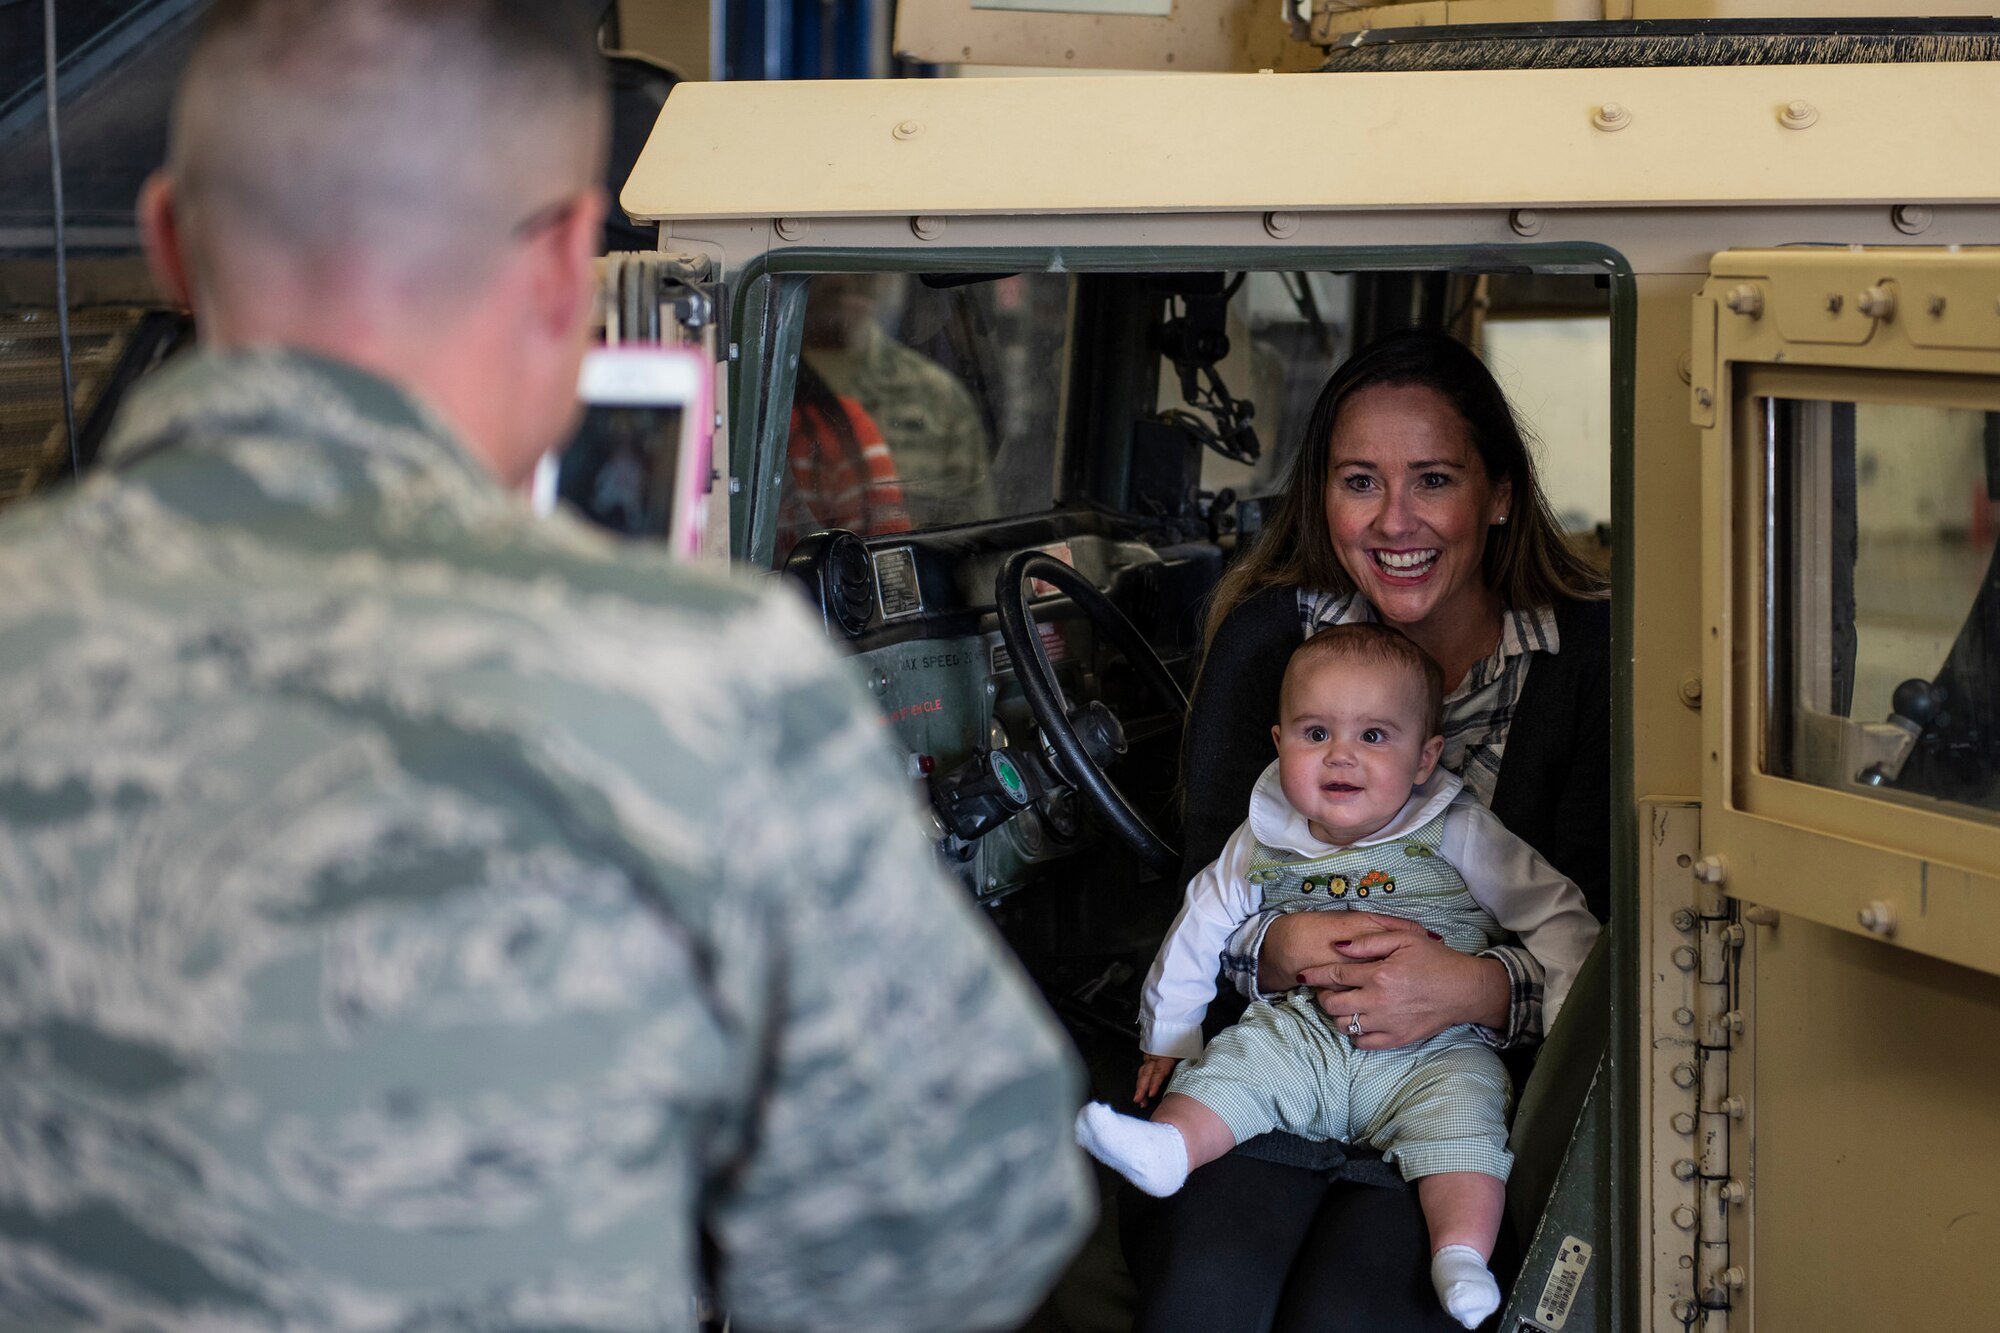 U.S. Air Force Maj. Daniel McGuire, 377th Logistics Readiness Squadron commander, takes a photo of his wife, Nicole and his son, Judah, in a Humvee during a spouse immersion event for the LRS vehicle management flight at Kirtland Air Force Base, N.M., and Oct. 30. Key spouses participated in the spouse immersion event to familiarize themselves with the vehicle management flight and provide them with an overview of their mission and resources that support Team Kirtland. Spouses and children were able to explore the different vehicles that the flight manages and maintains. (U.S. Air Force photo by Airman 1st Class Austin J. Prisbrey)